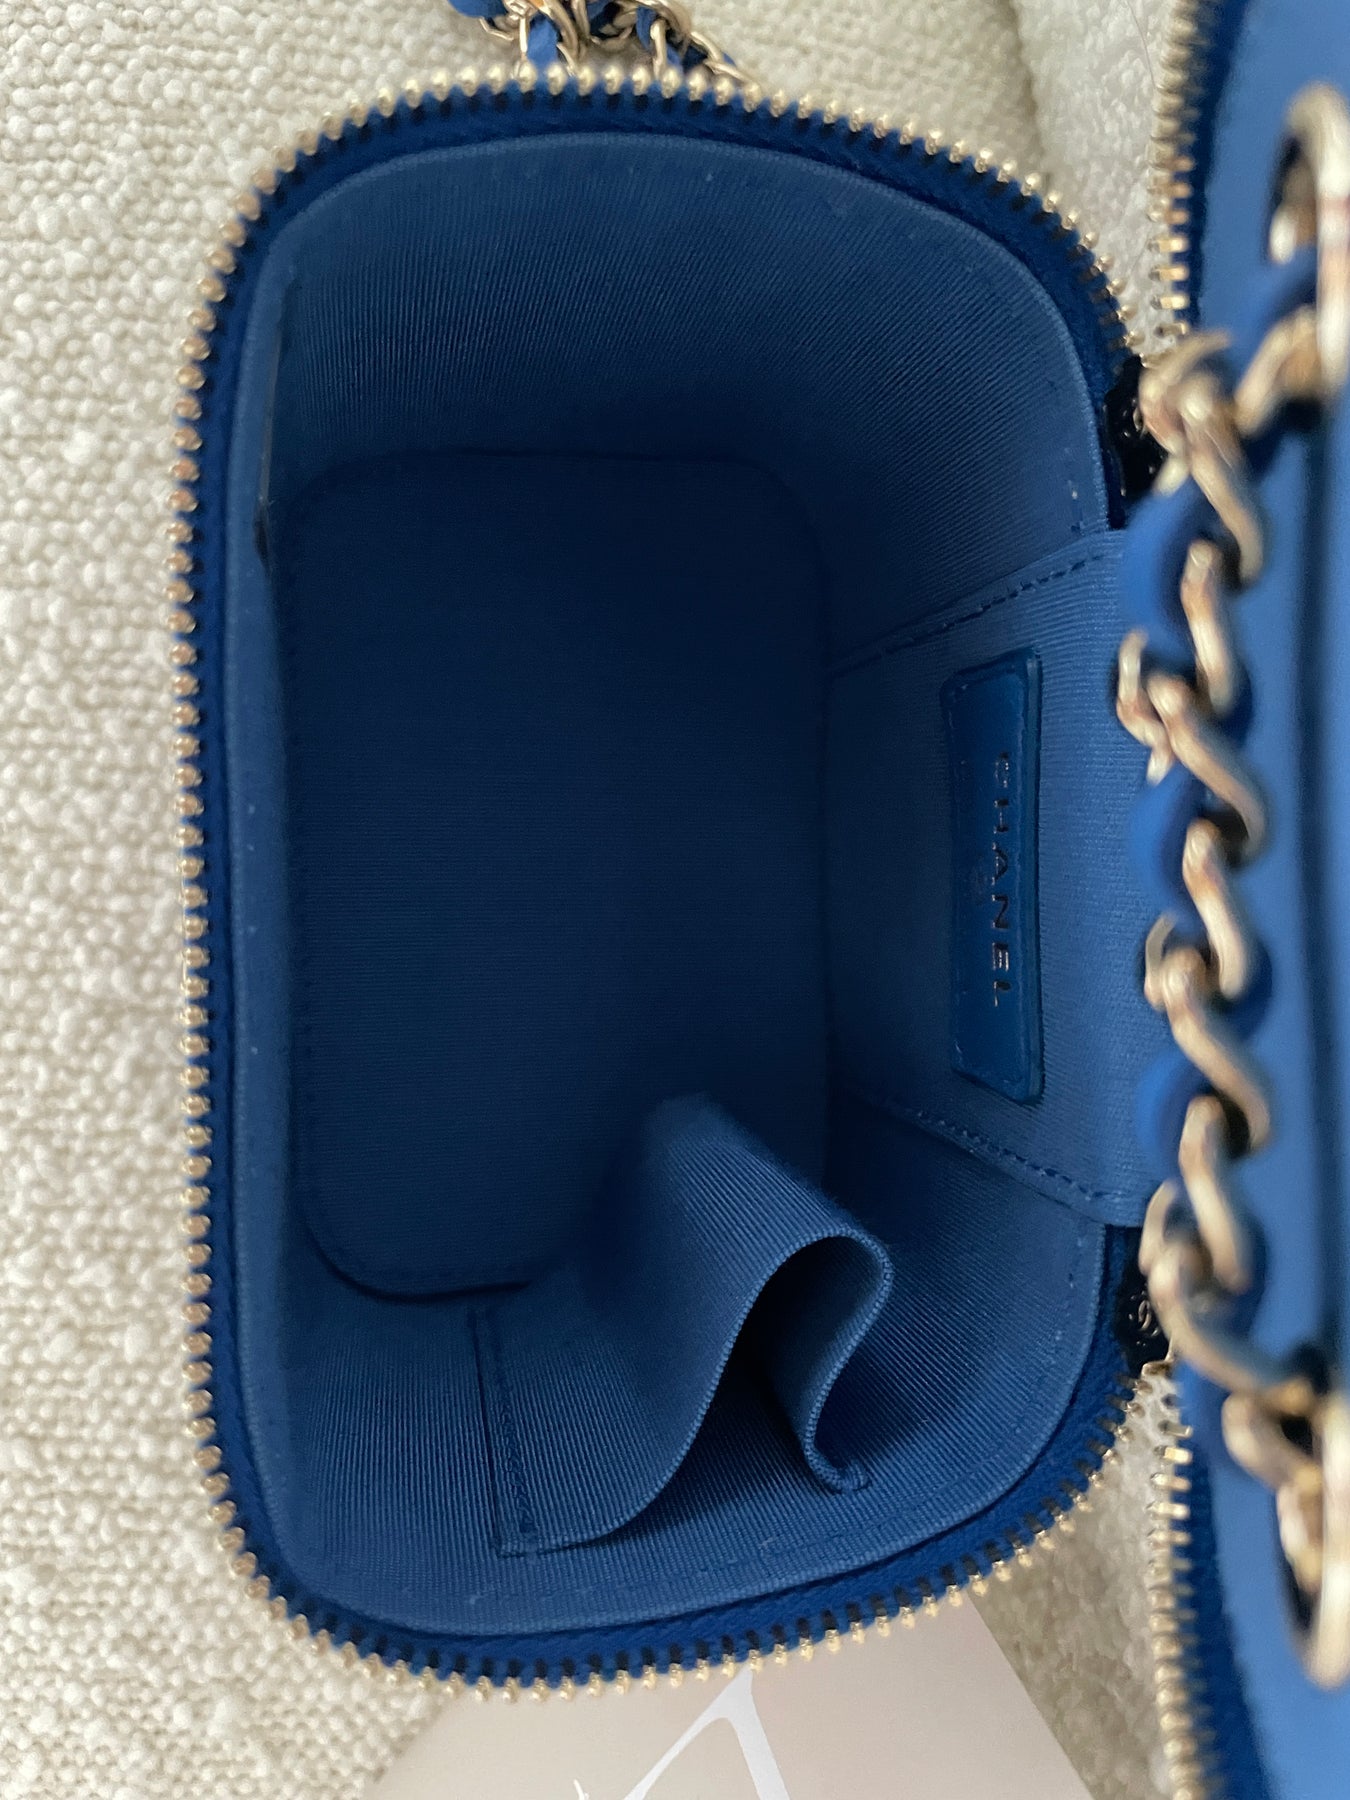 CHANEL Small Blue Vanity With Chain – LUV Preloved